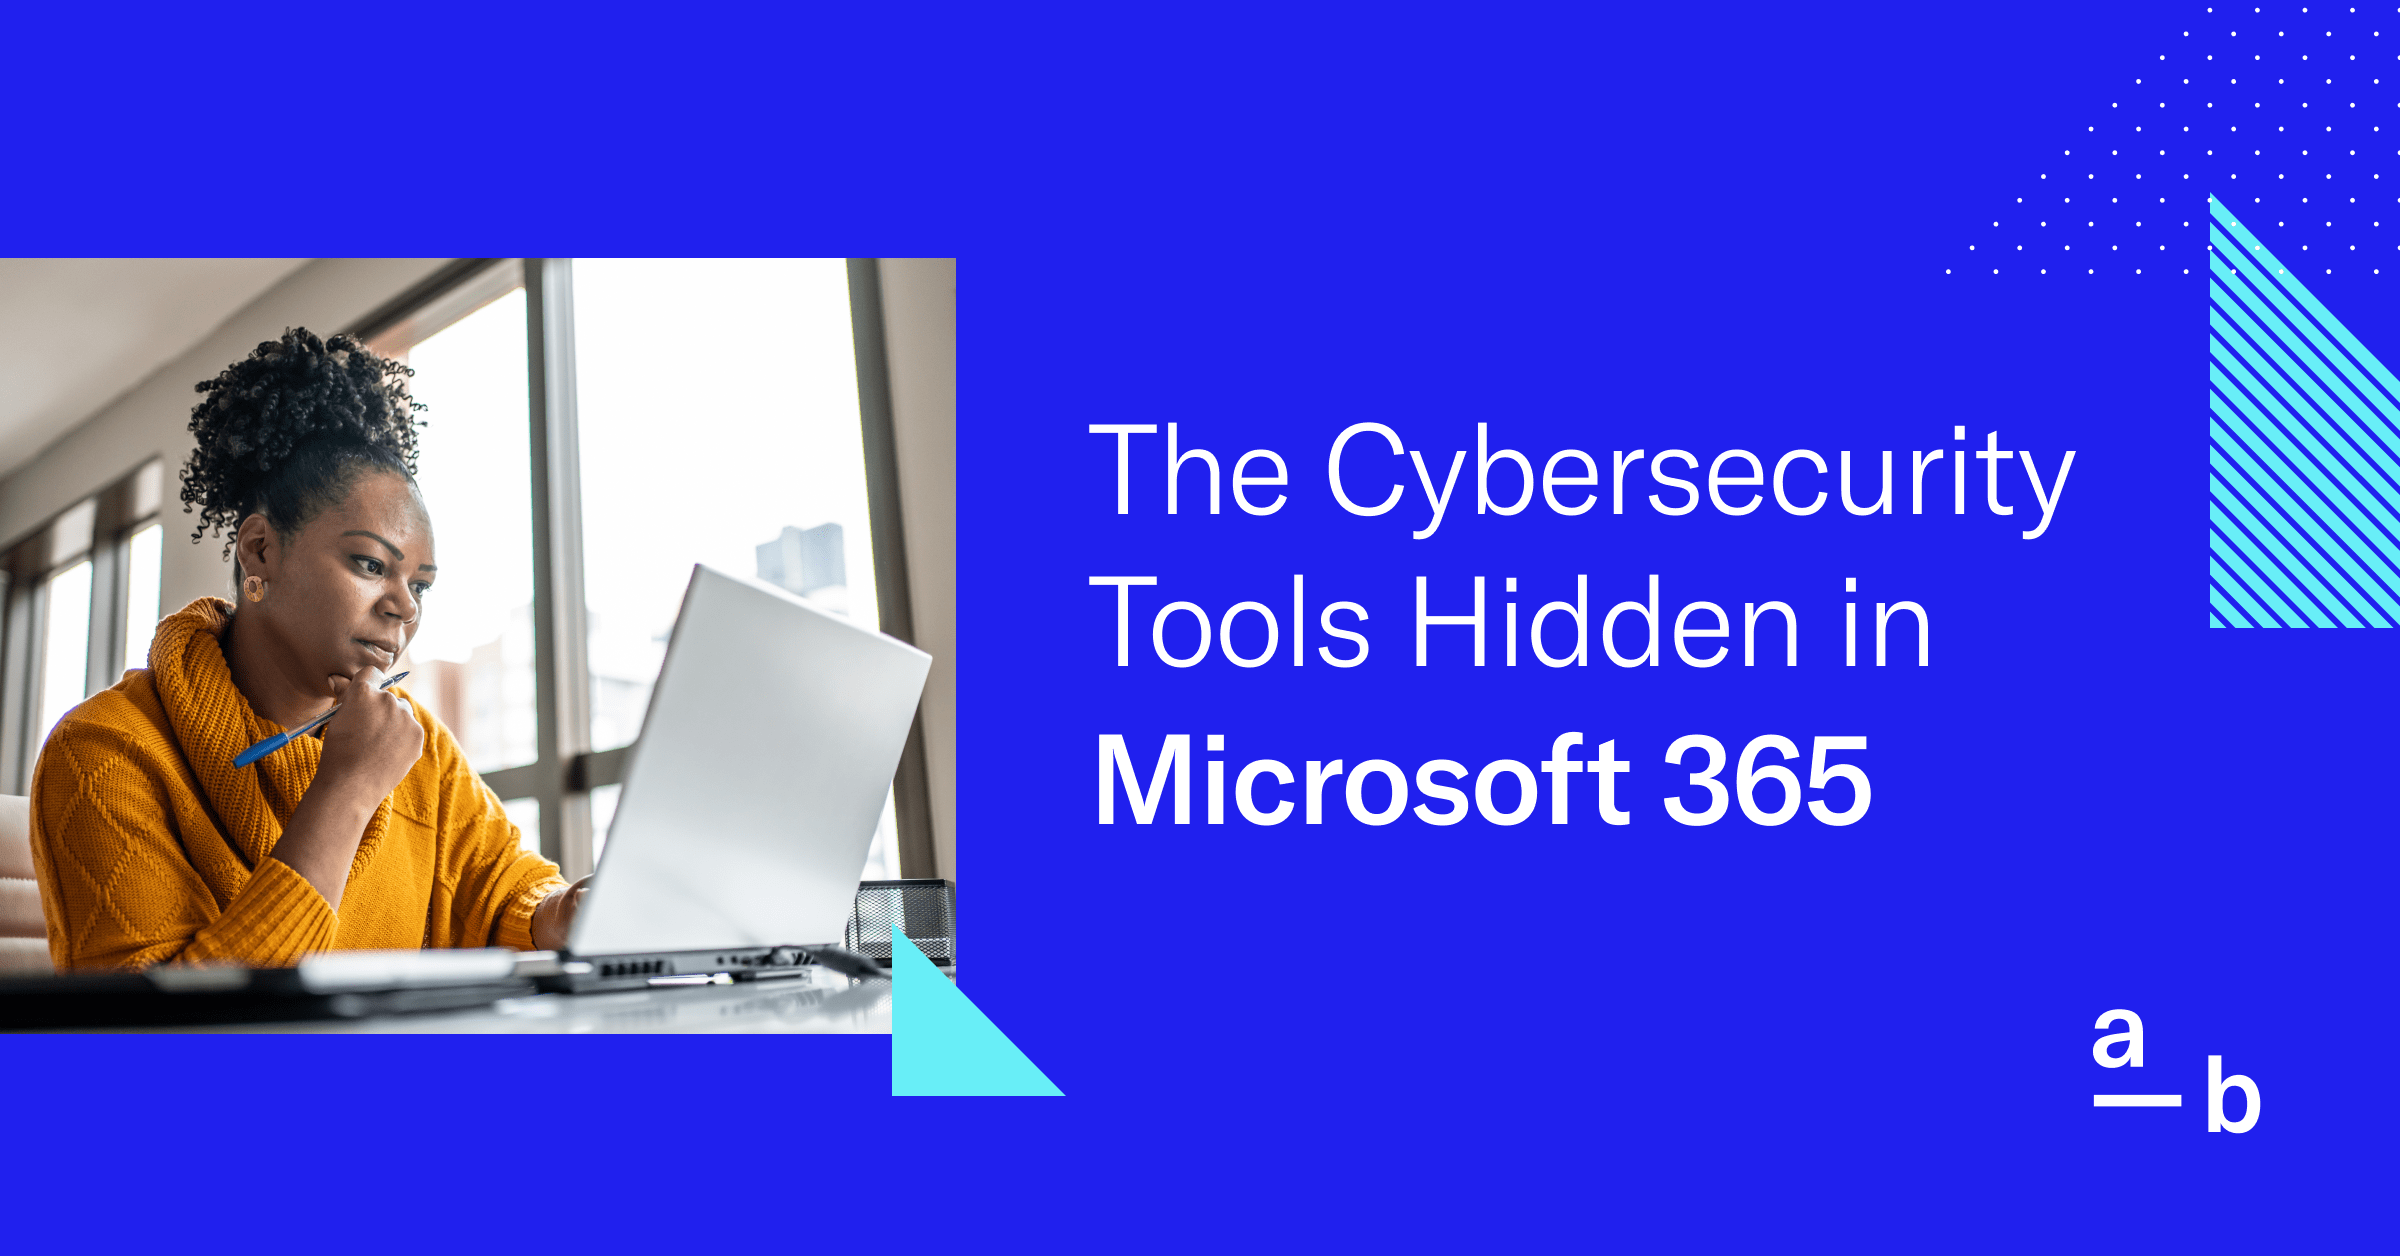 The Cybersecurity Tools Hidden in Microsoft 365